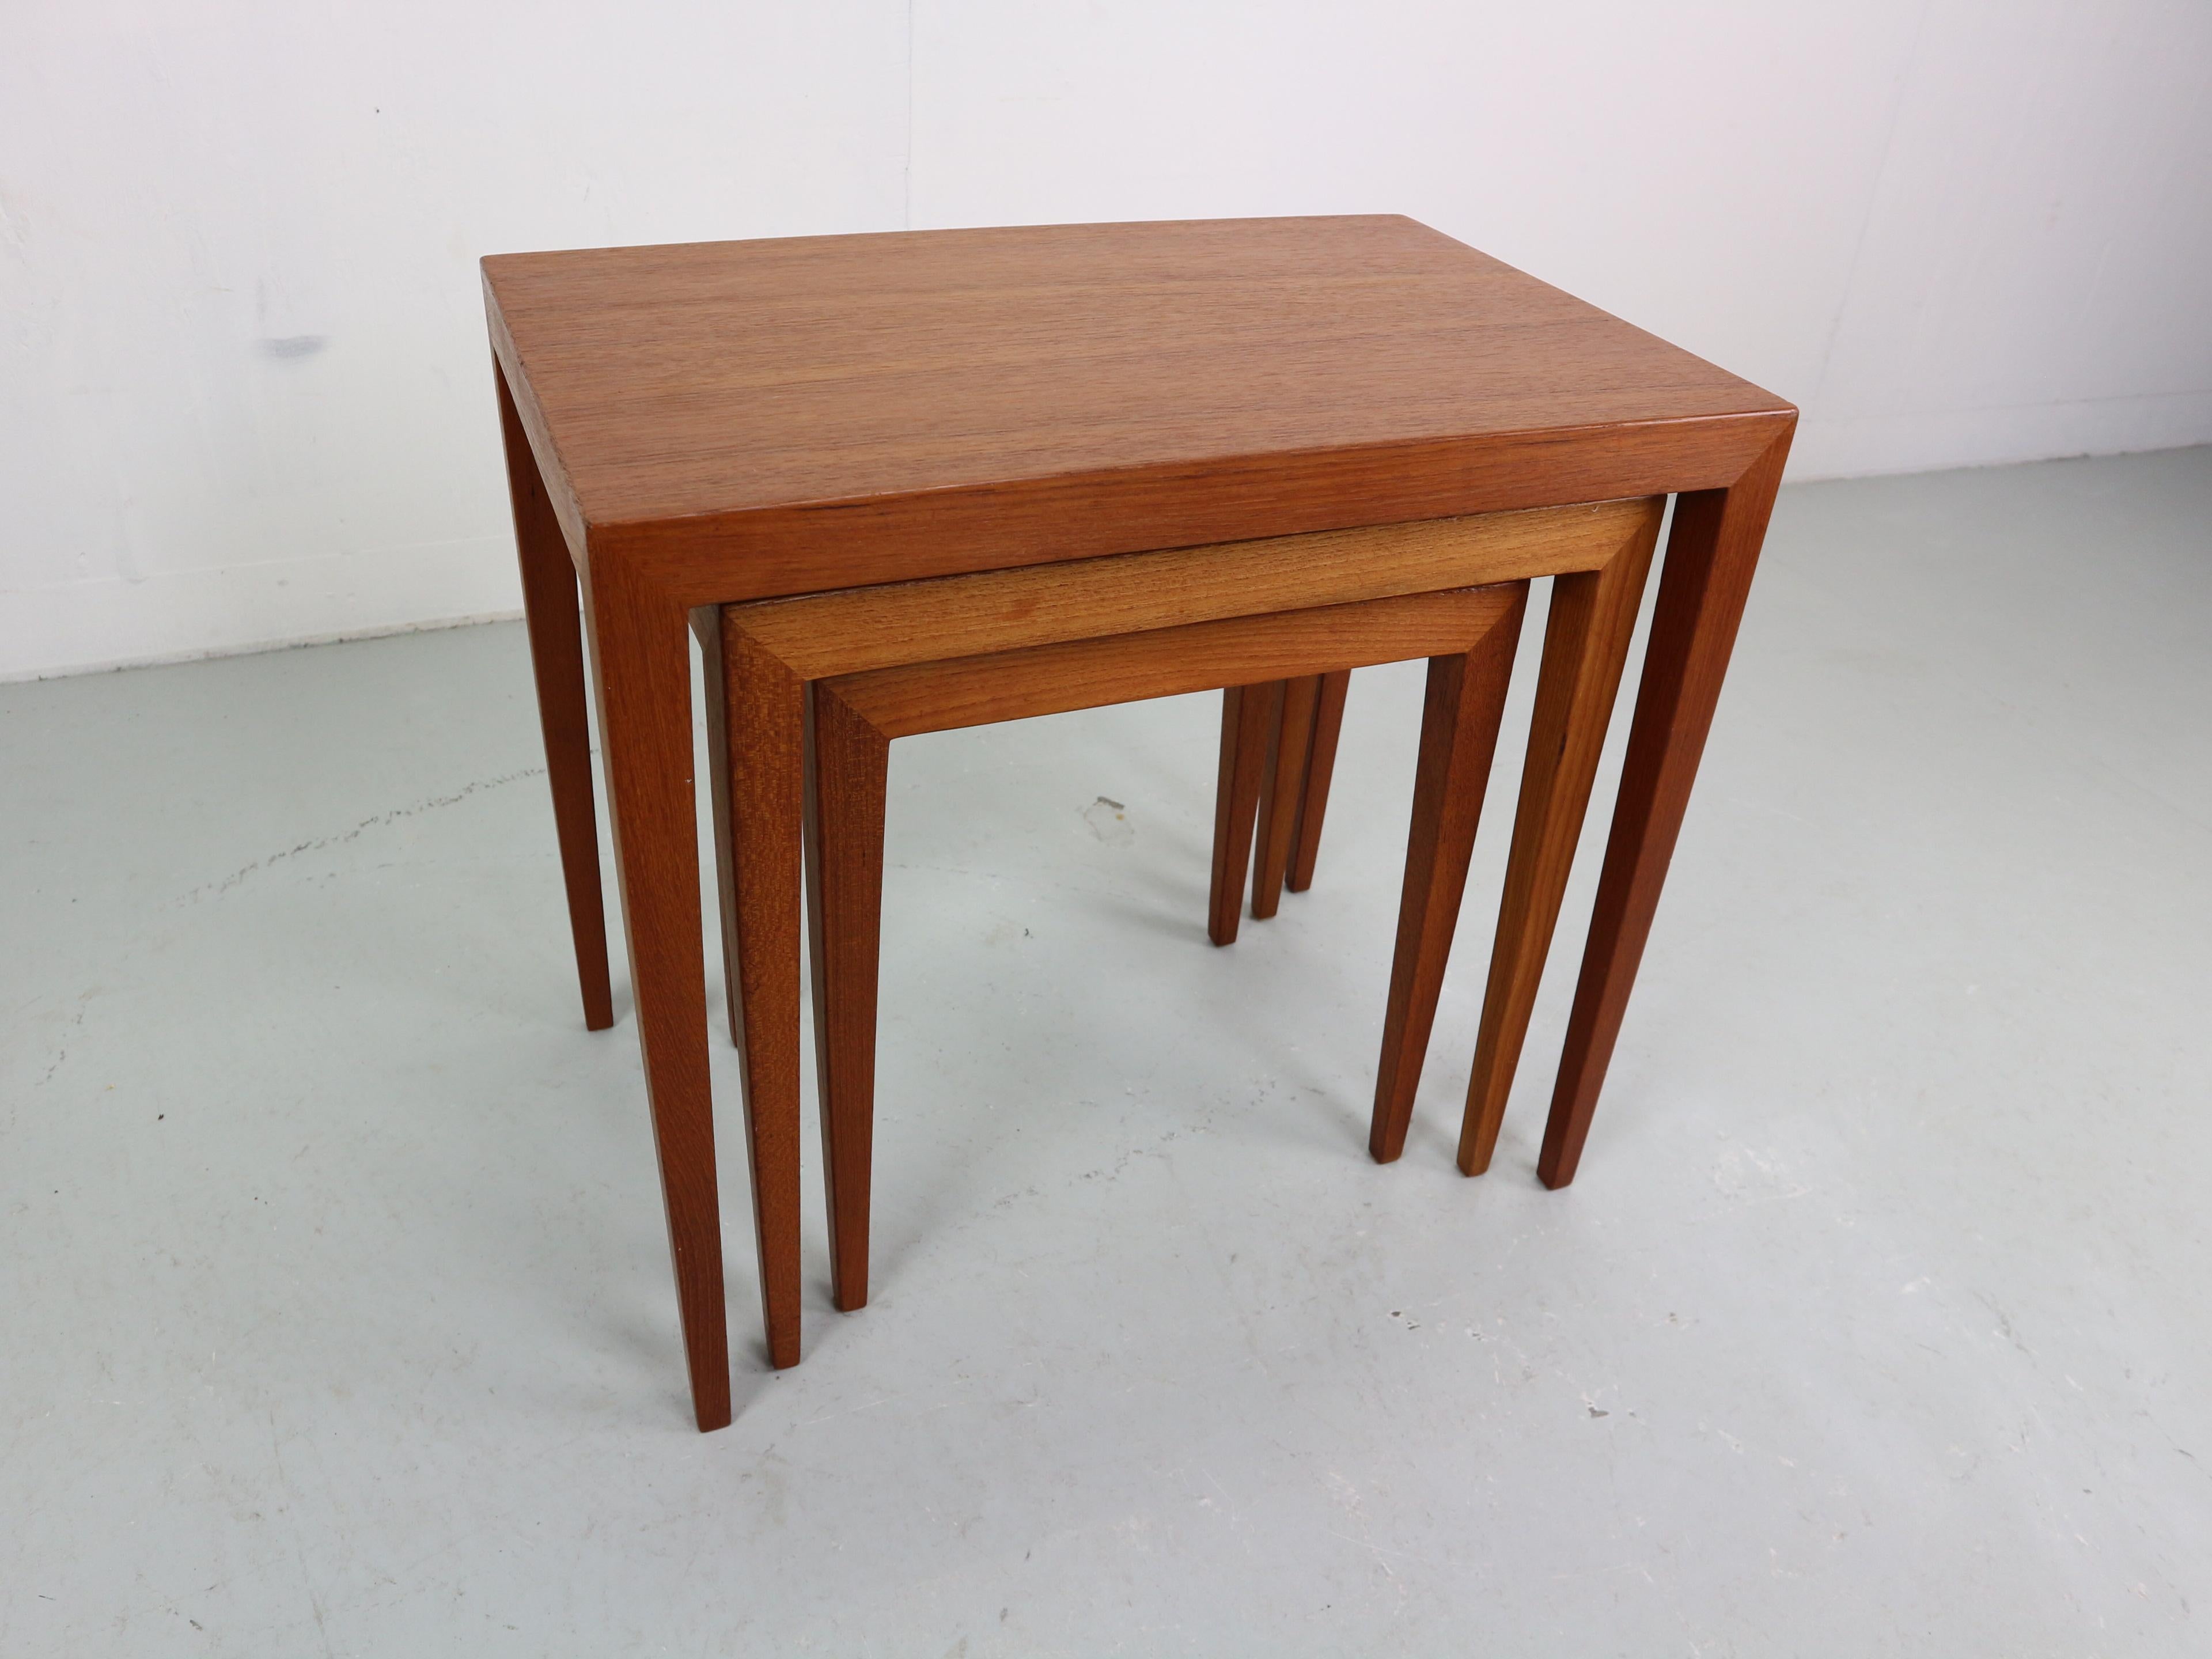 Very nice sophisticated set of nesting tables model 163 designed by Severin Hansen Jr. for Haslev Møbelsnedskeri, Denmark, 1960. This nesting table set is made of very nice grained teak veneer and its amazing finished. These tables show quality all